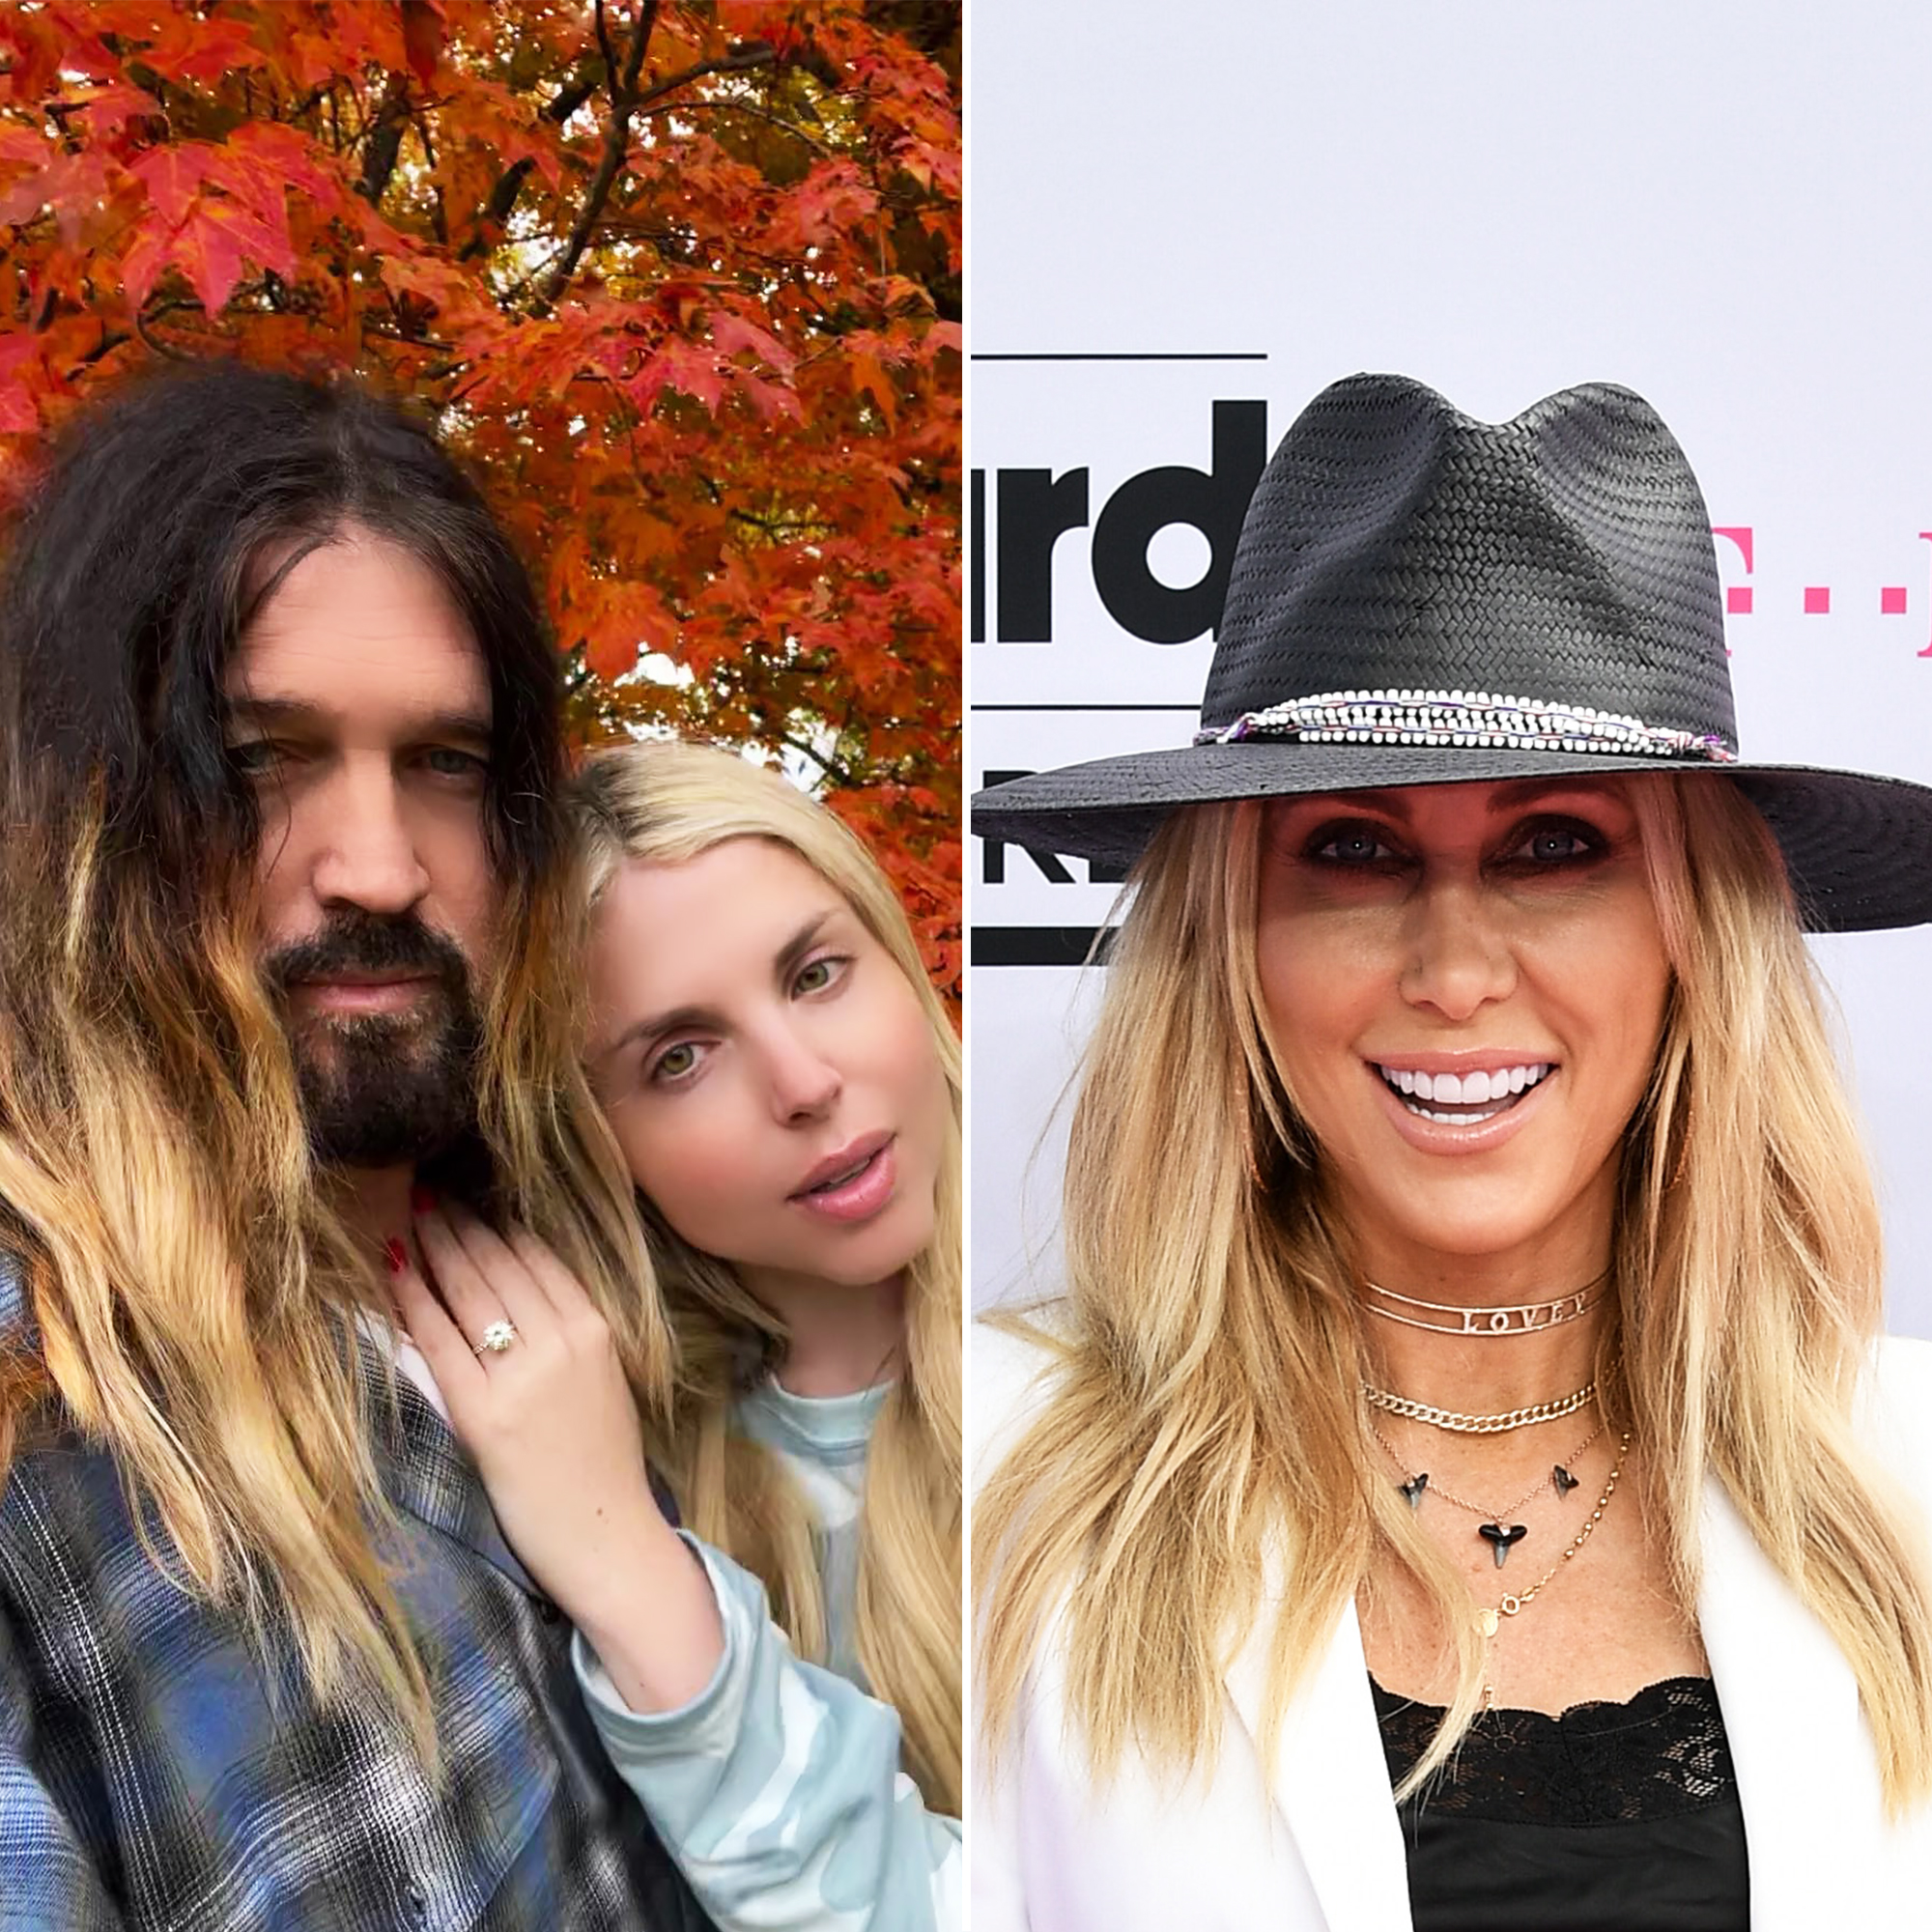 Billy Ray Cyrus Engaged to Firerose: 'We Found This Harmony